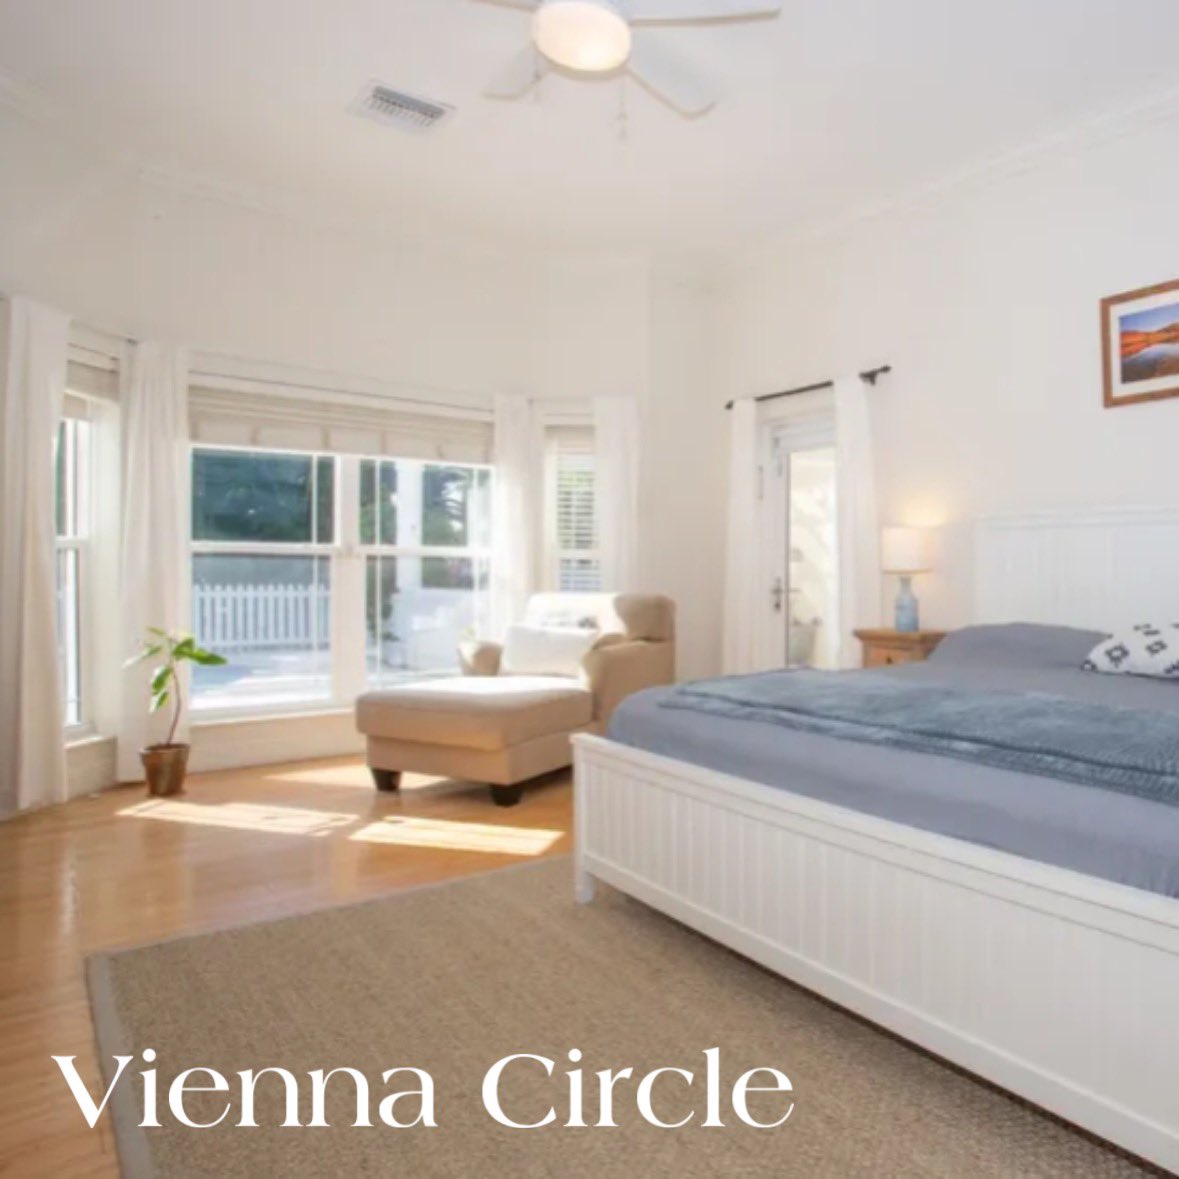 Vienna Circle

The master bedroom is spacious, bright & airy with picture window. The large ensuite bathroom includes a separate shower, tub and double sinks

Member of CIREBA 
MLS # 417365

#Tuesday #MasterBedroom
#CaymanRealEstate #caymansothebysrealty #caymanislandsrealestate